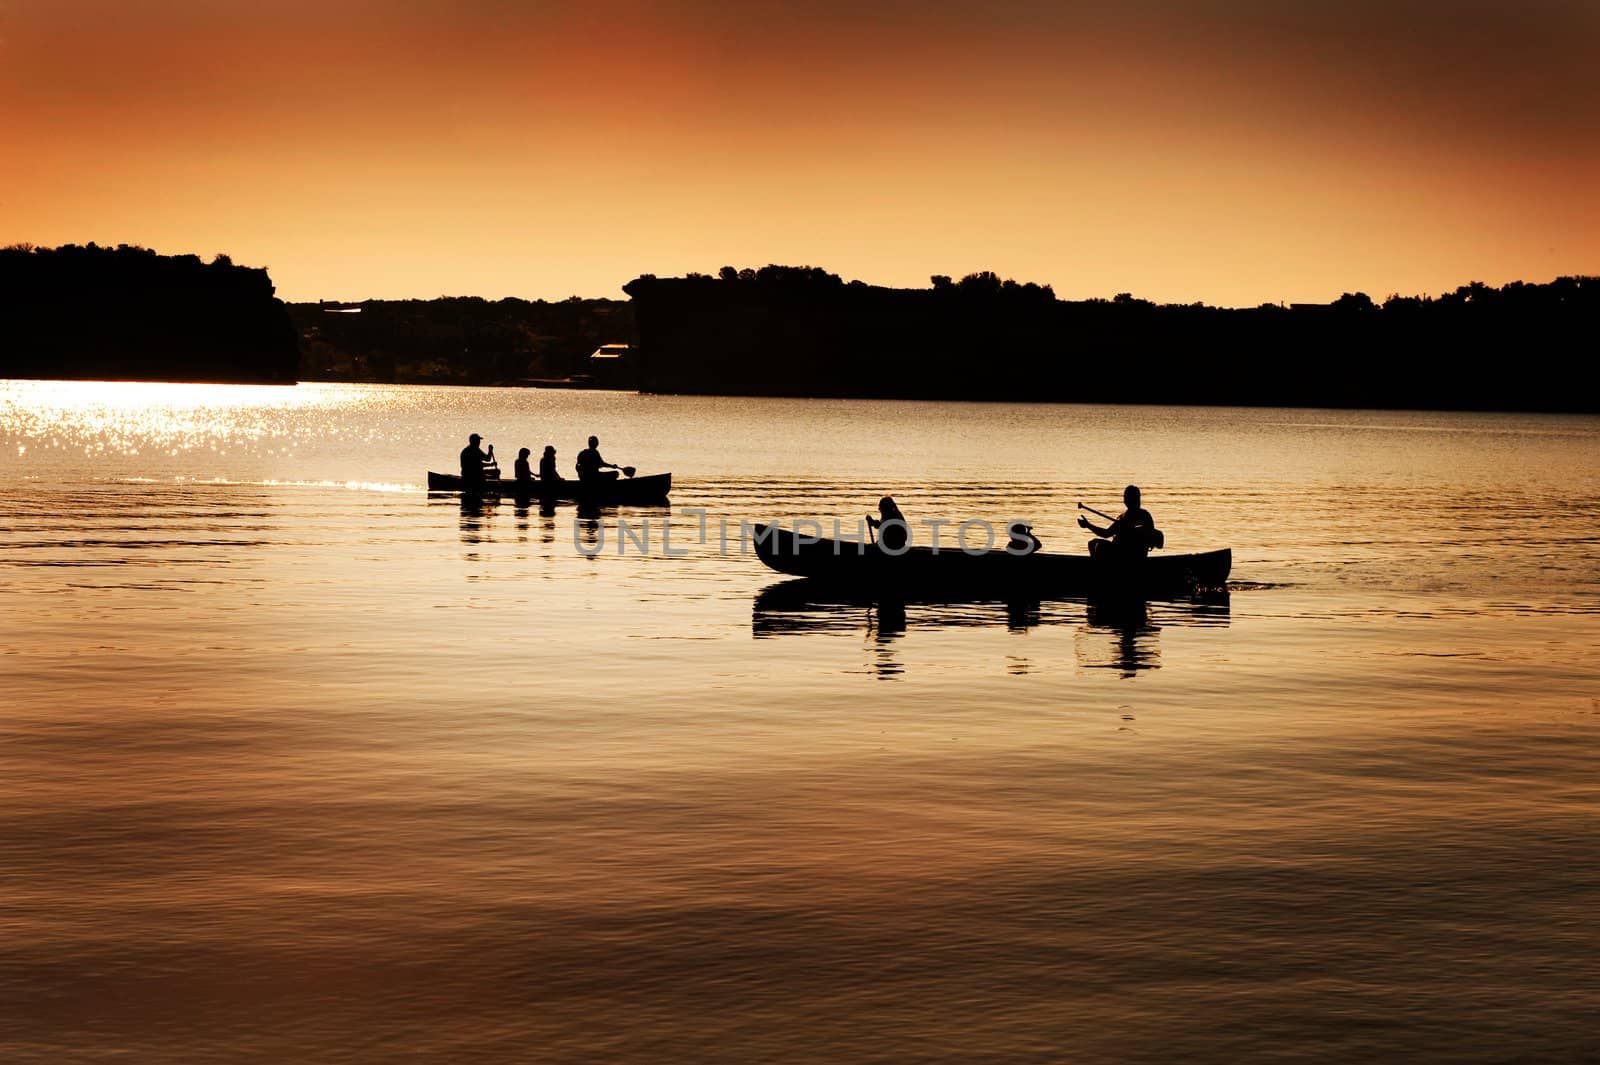 Image of silhouette of canoers on a lake